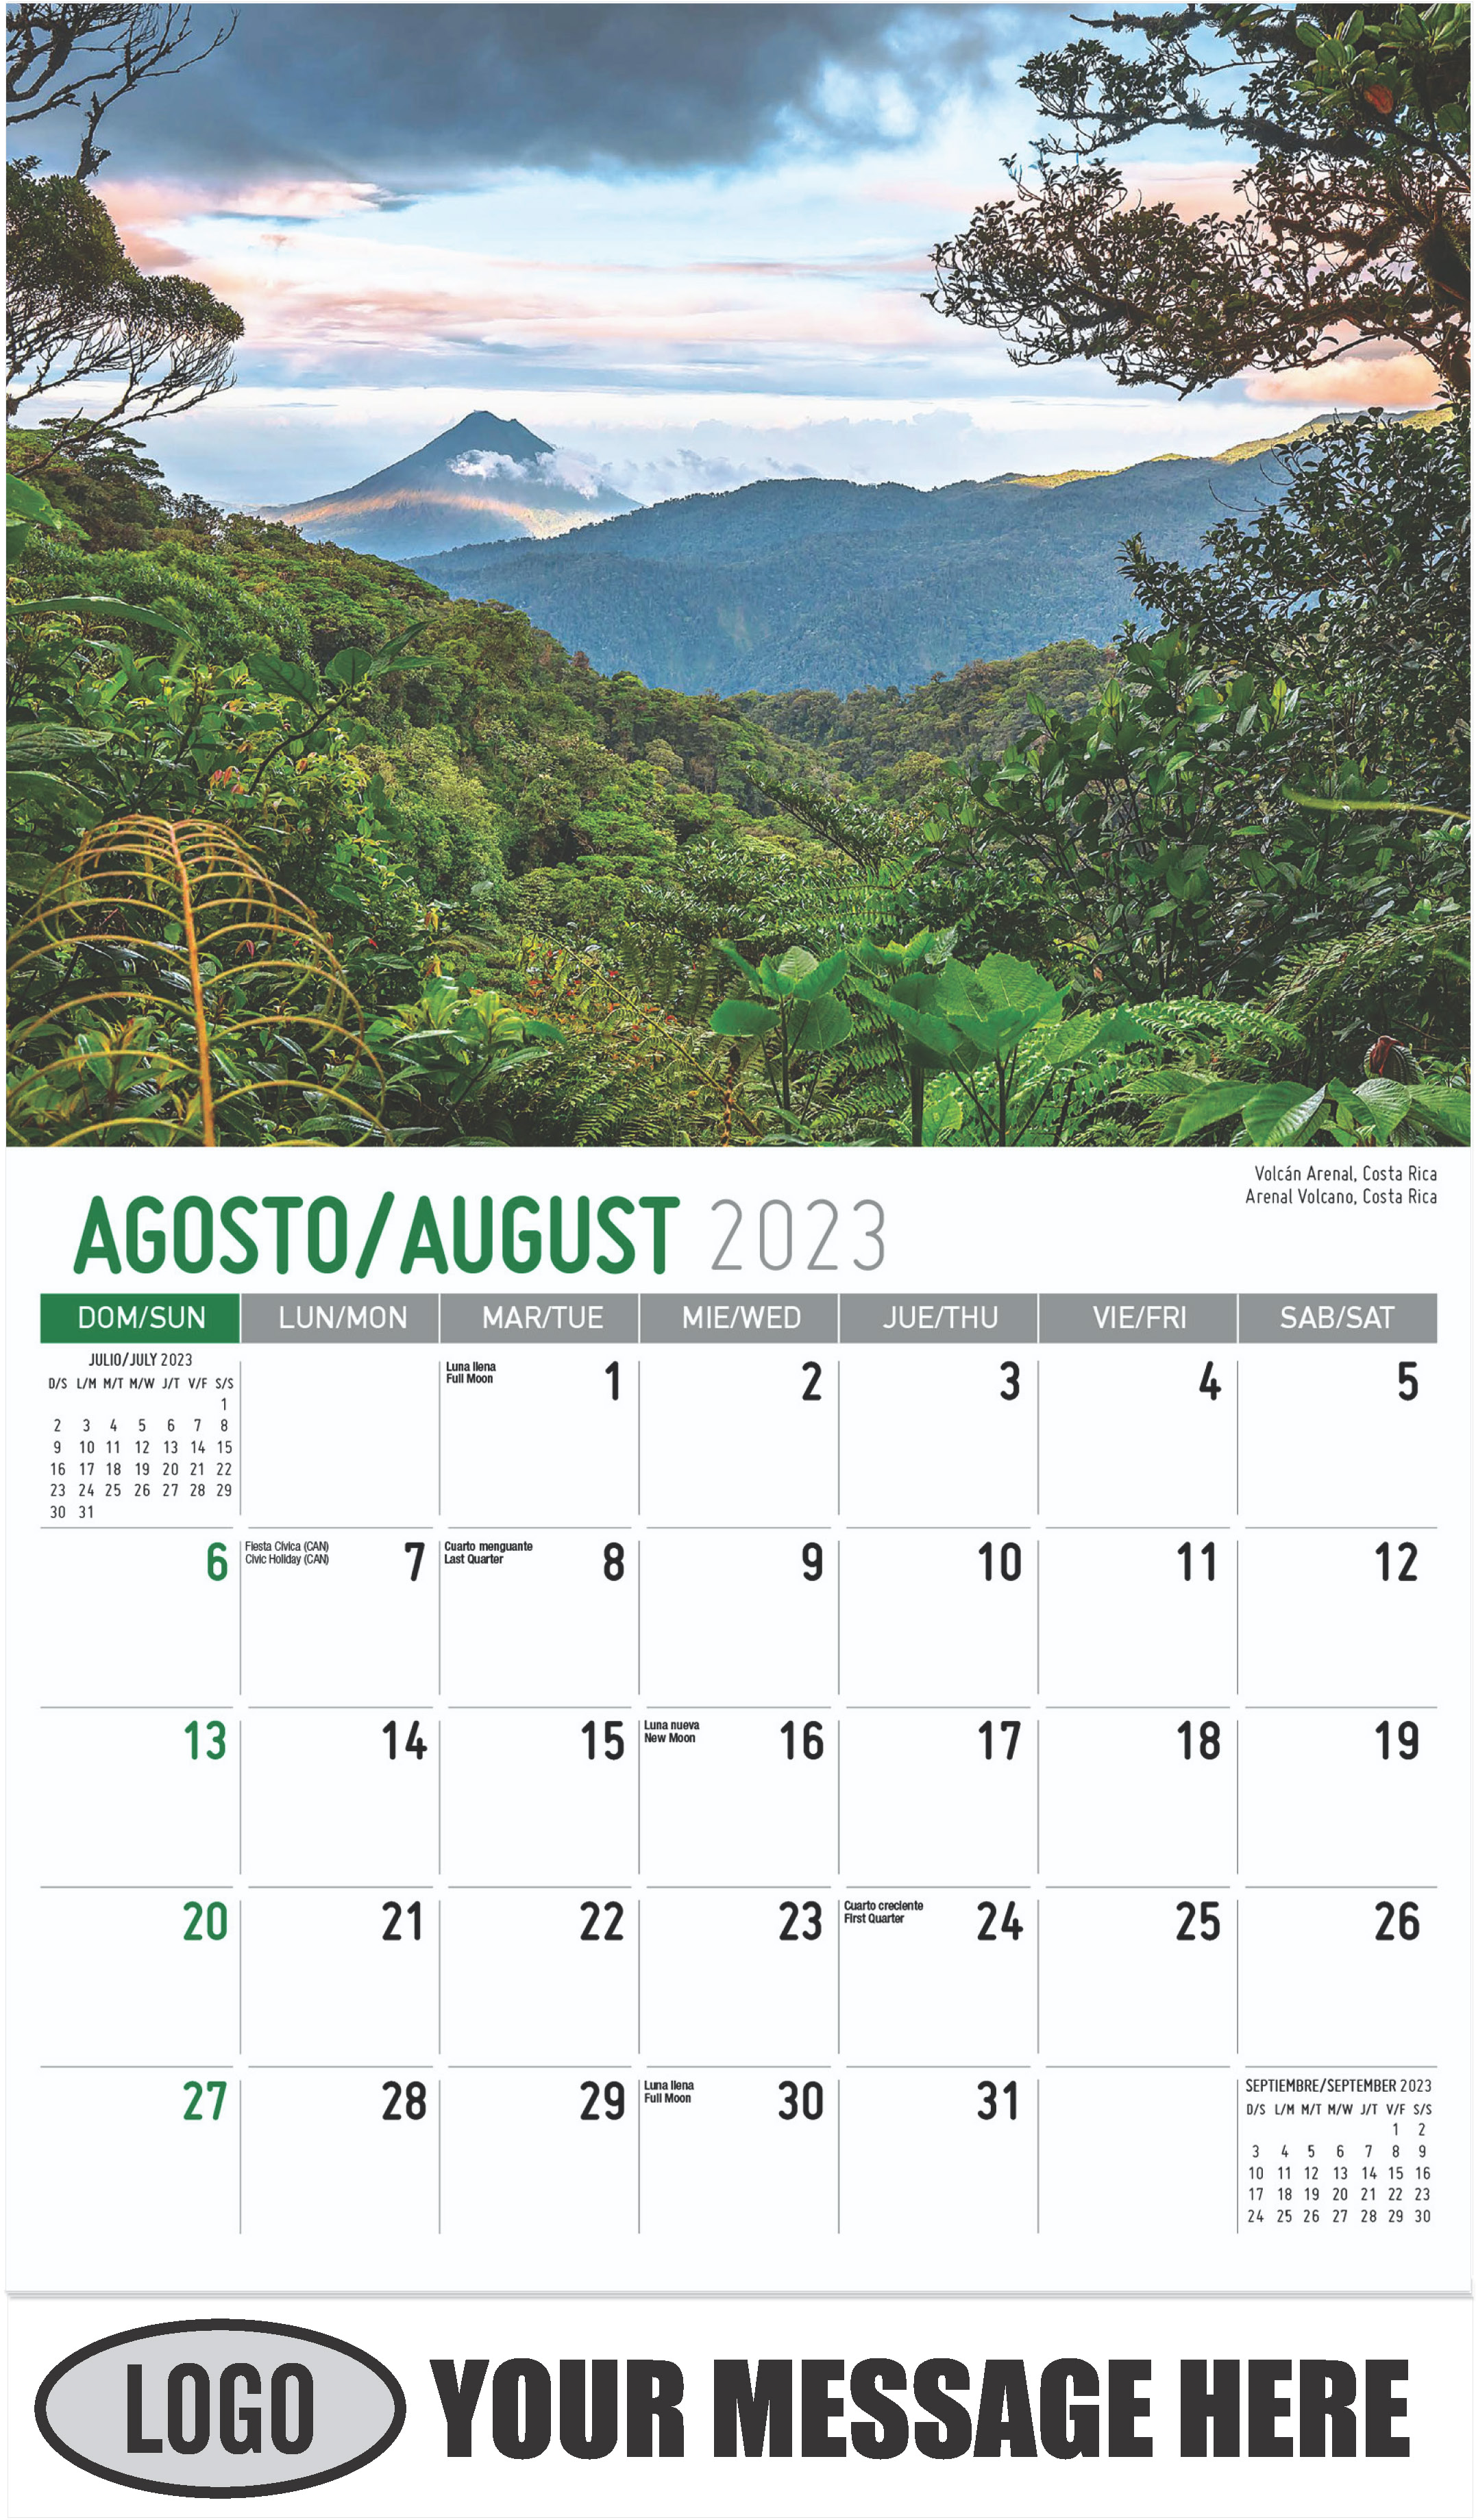 Arenal Volcano, Costa Rica - August - Beauty of Latin America 2023 Promotional Calendar